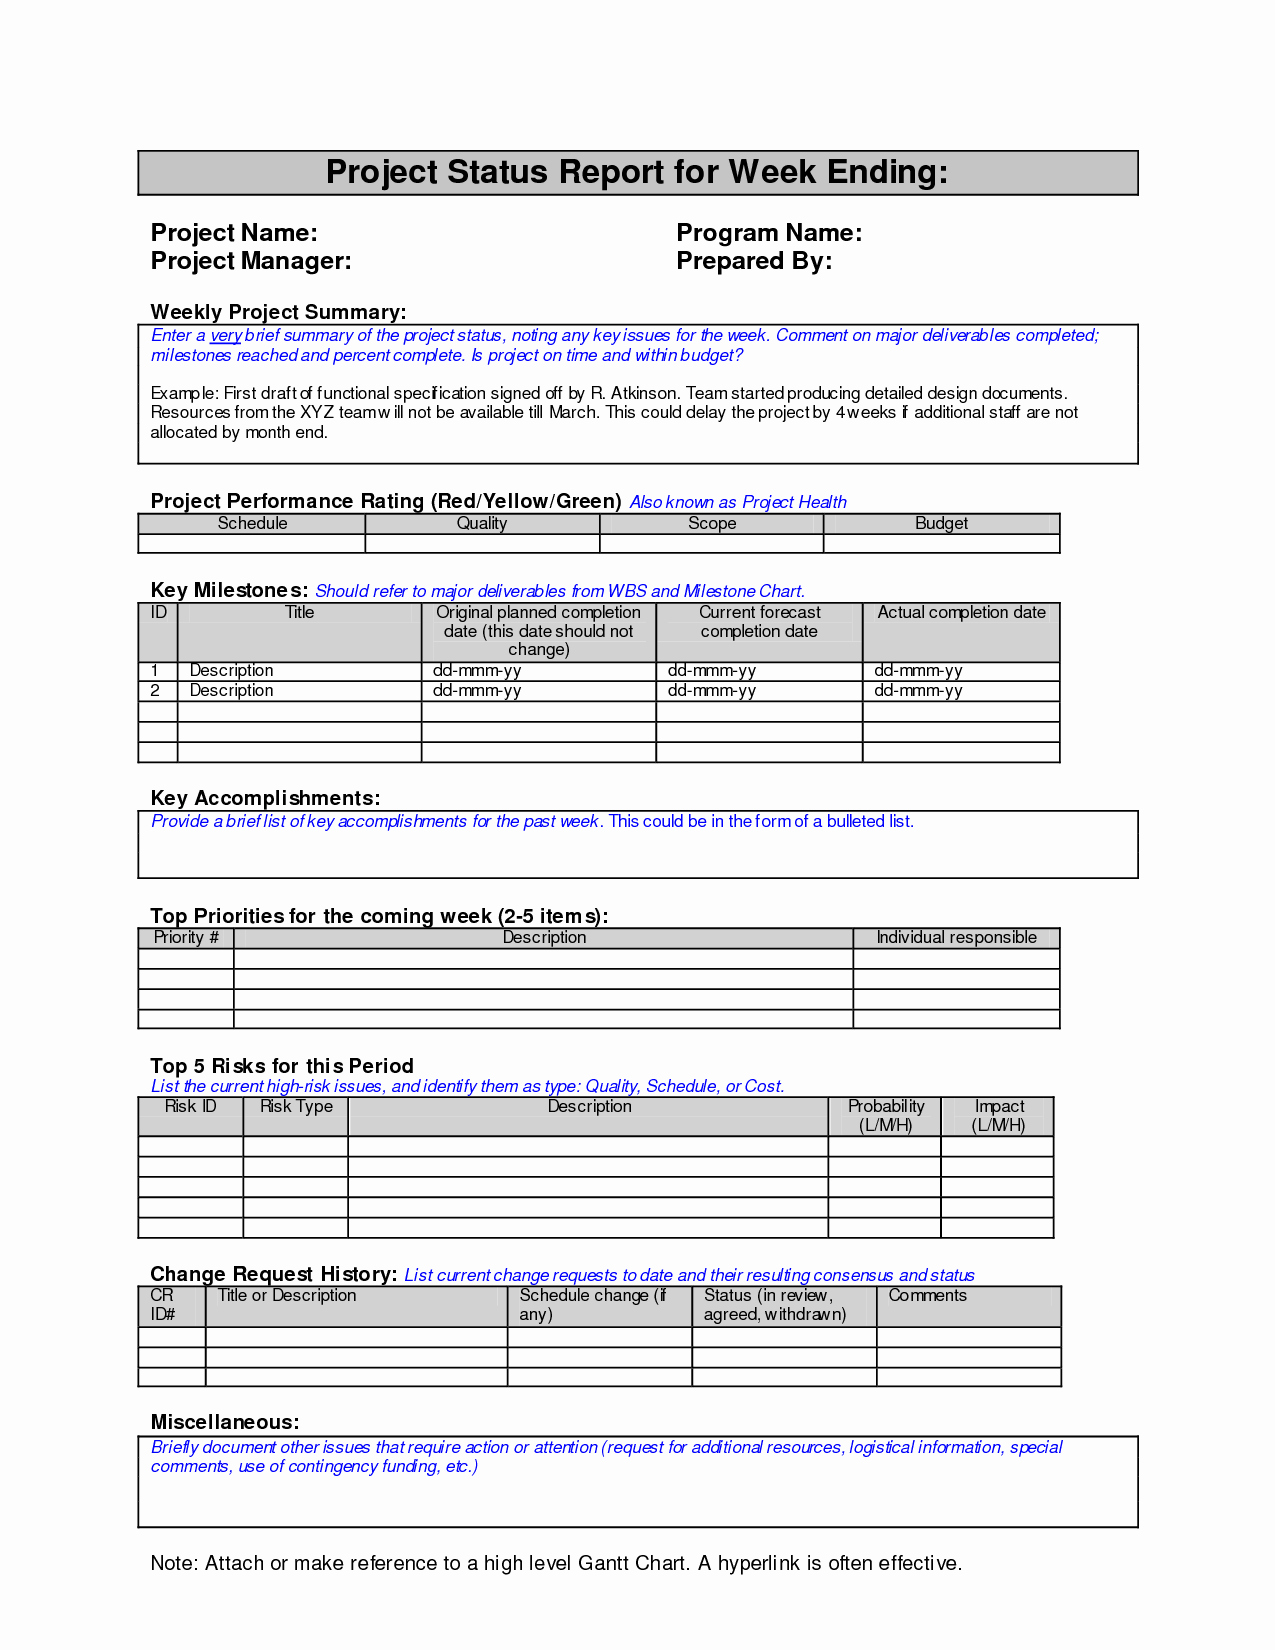 Weekly Status Report Template Awesome Weekly Project Status Report Sample Google Search